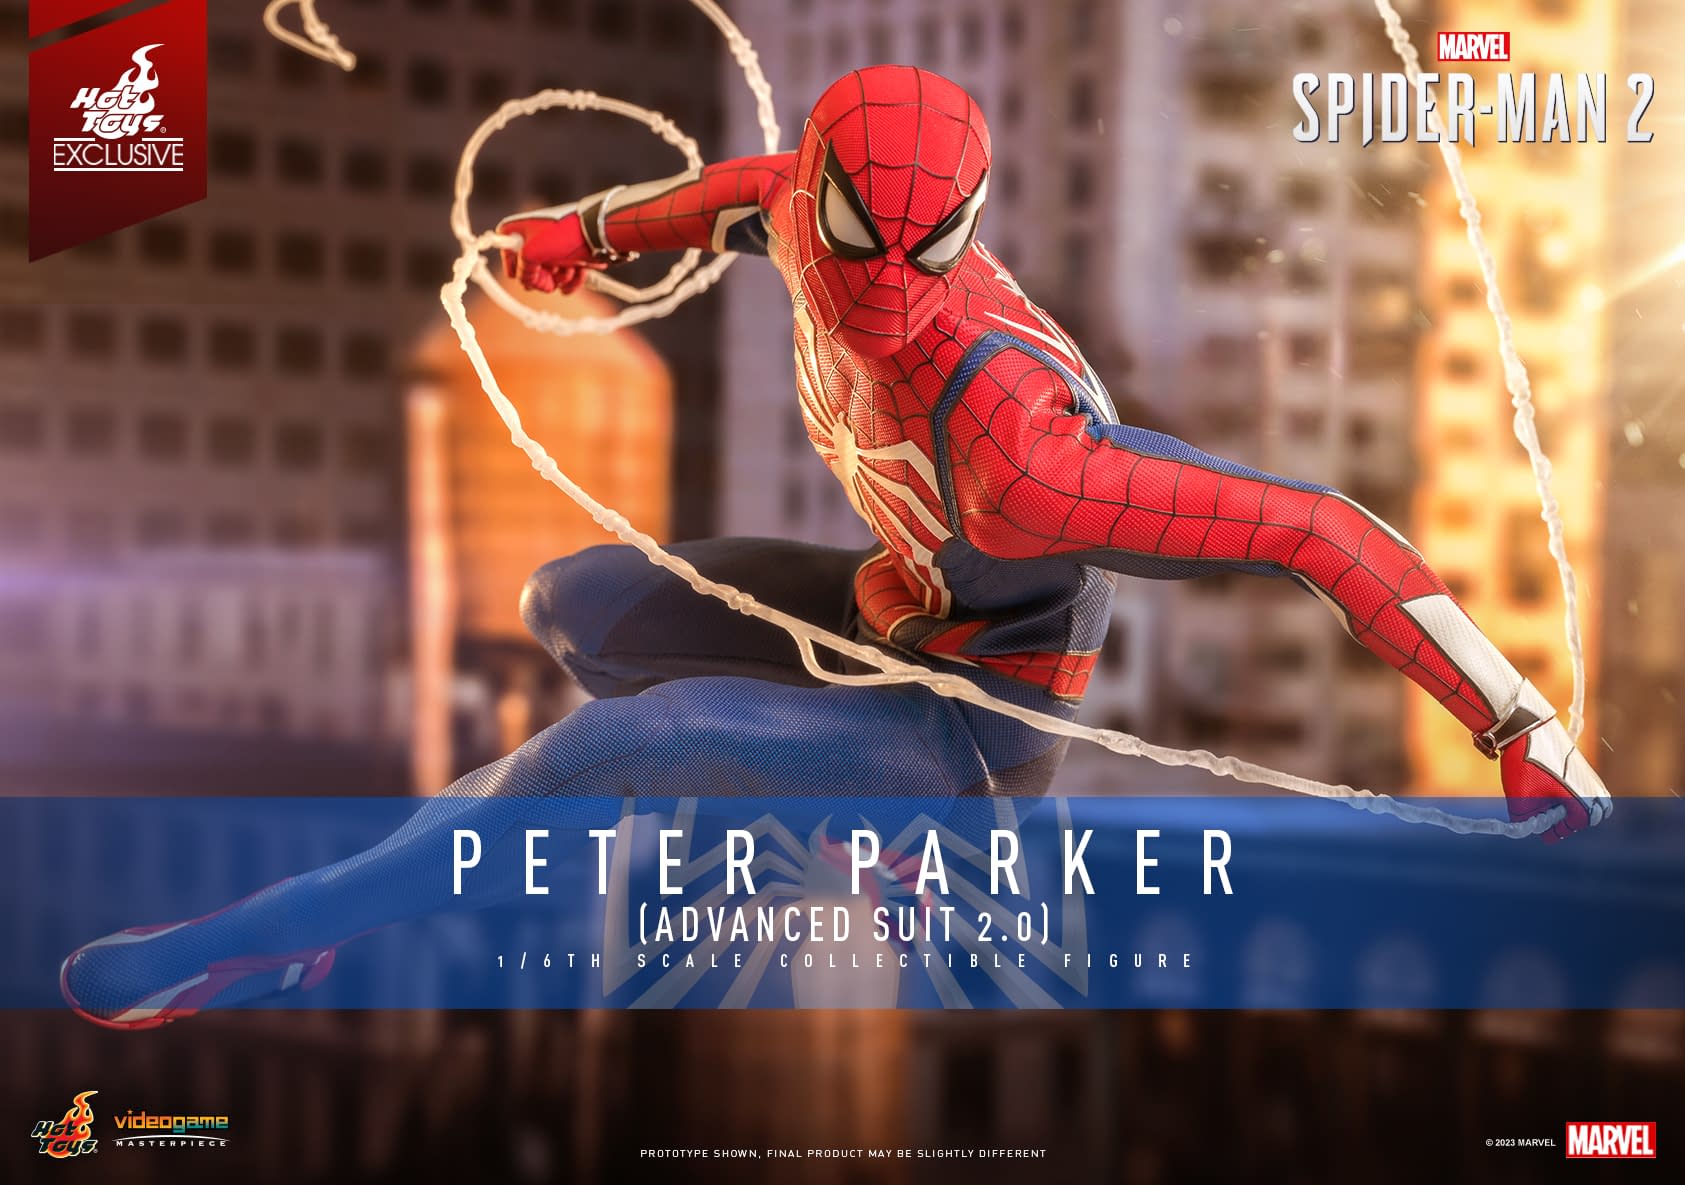 Marvel's Spider-Man 2 1/6 Scale Figures Coming Soon from Hot Toys